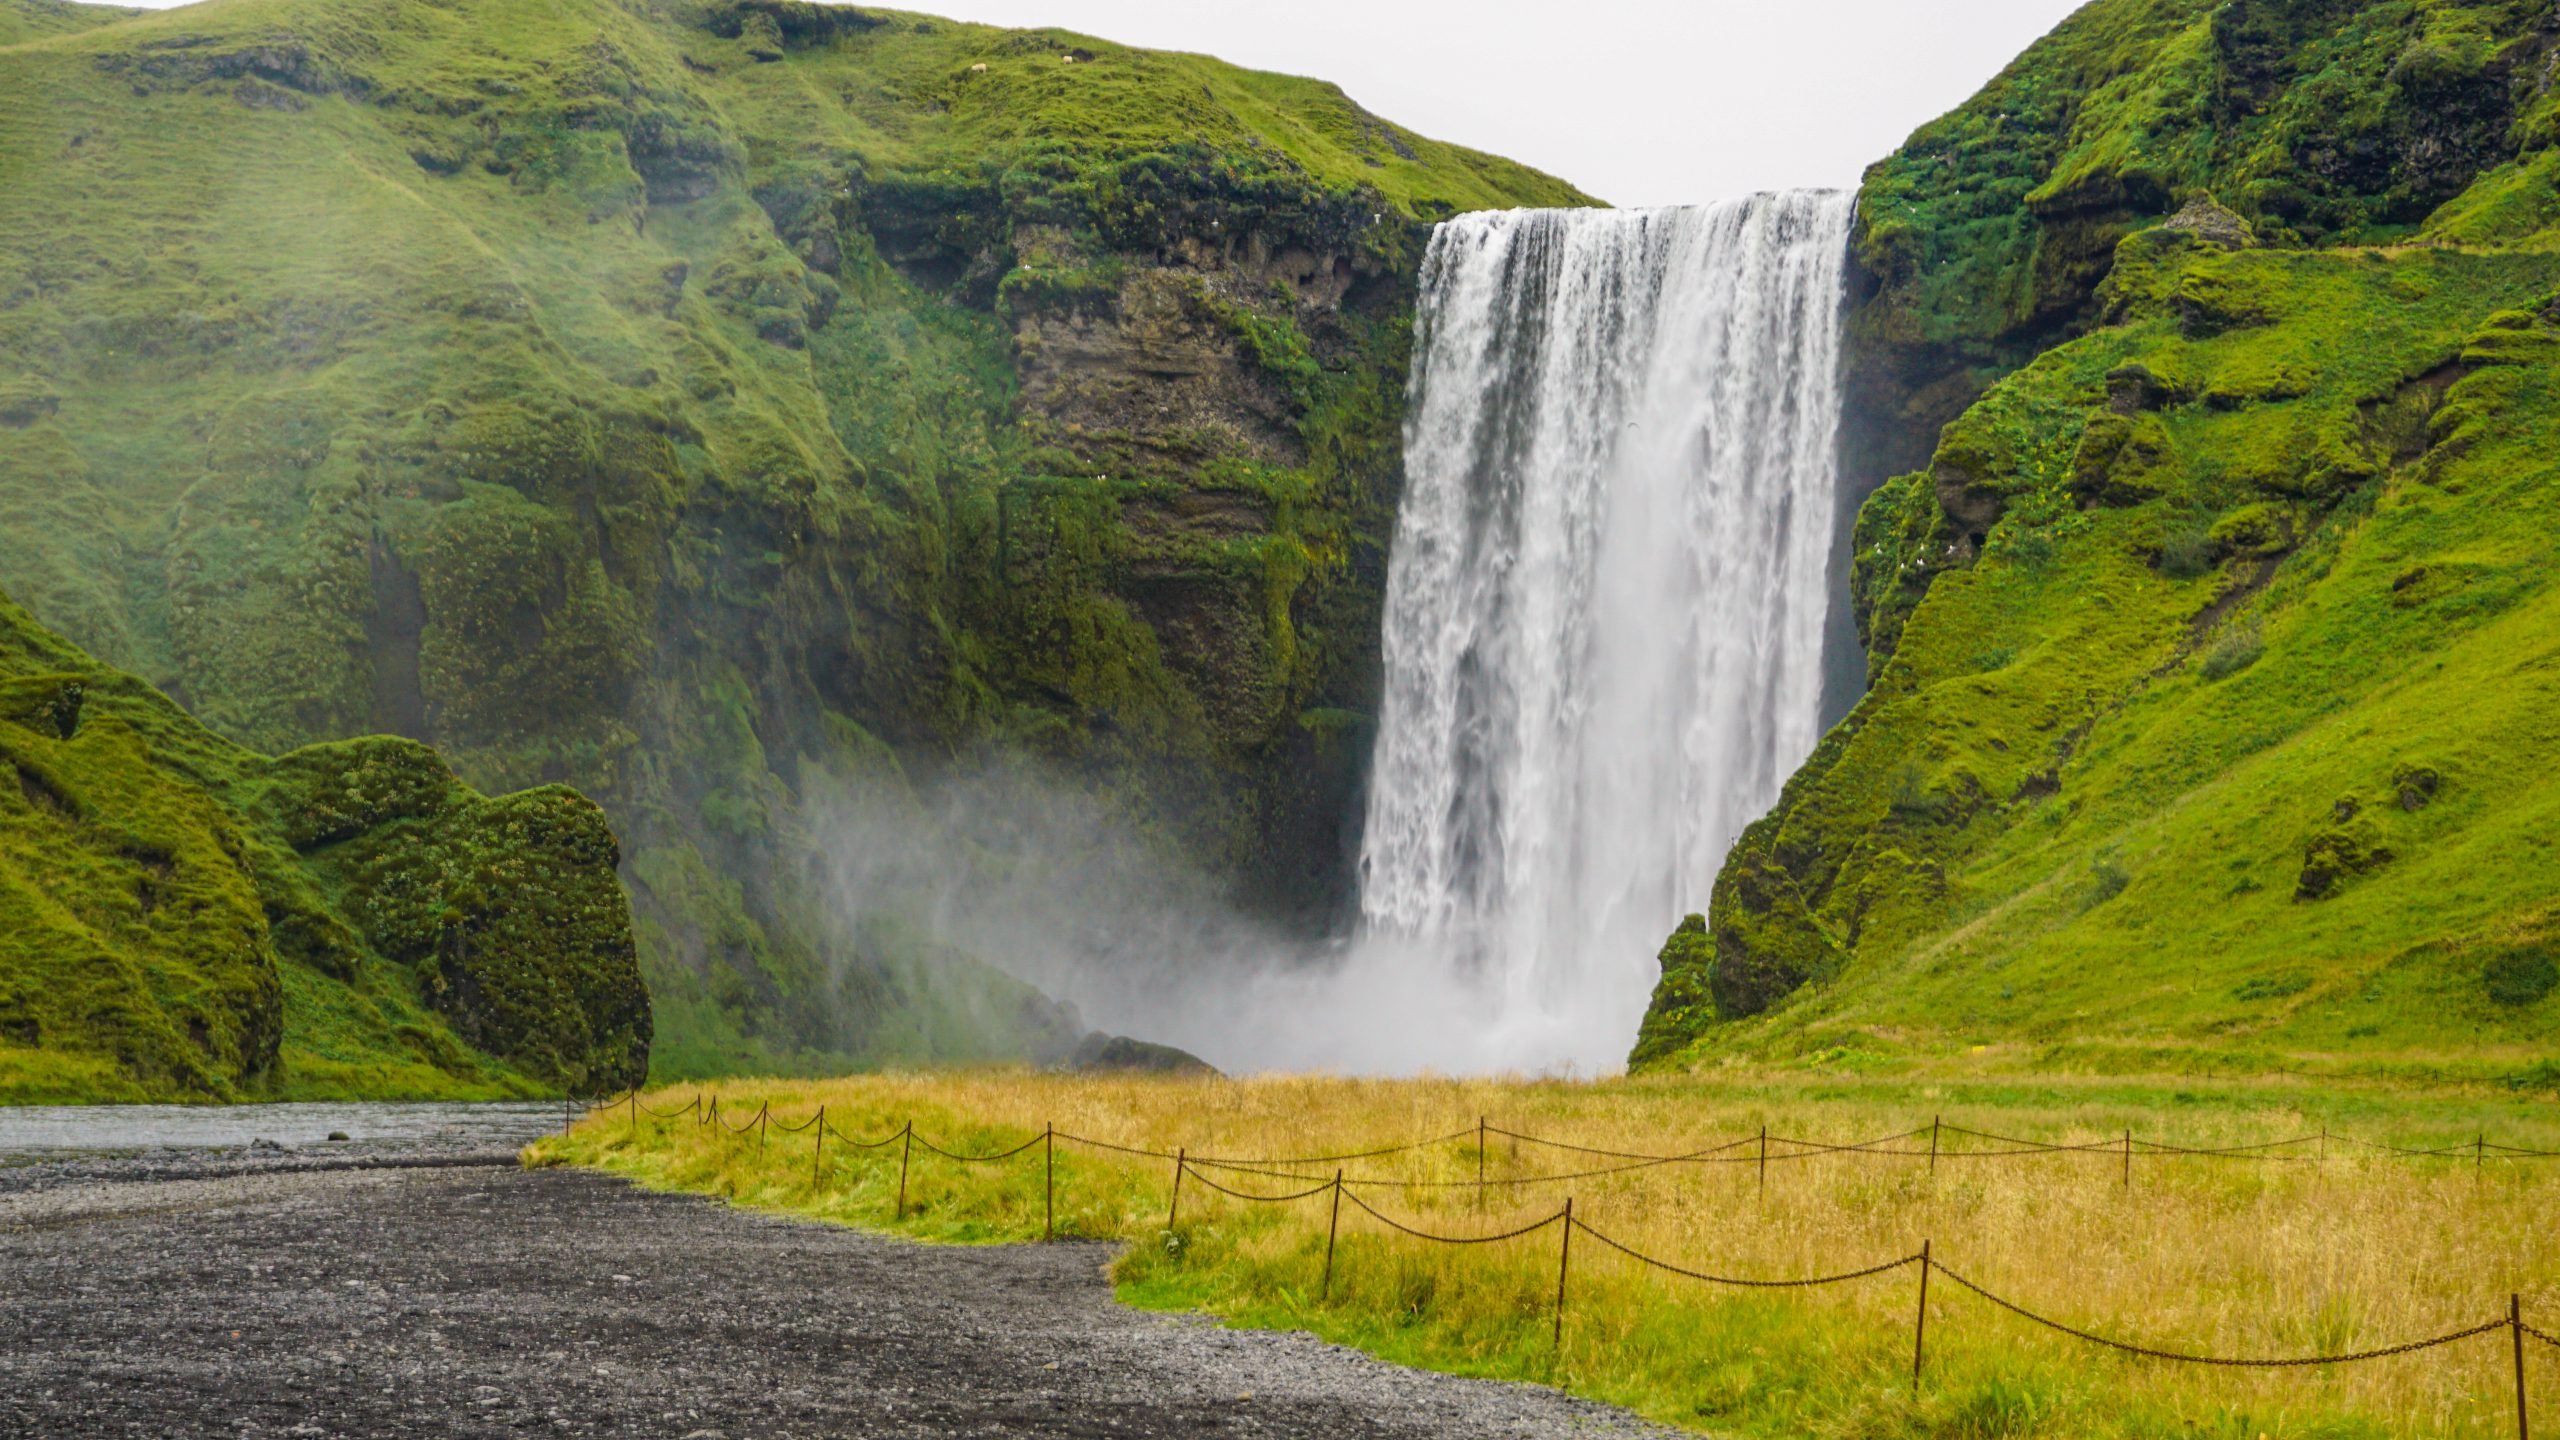 Featured image for the 12-day iceland road trip itinerary post showing a waterfall